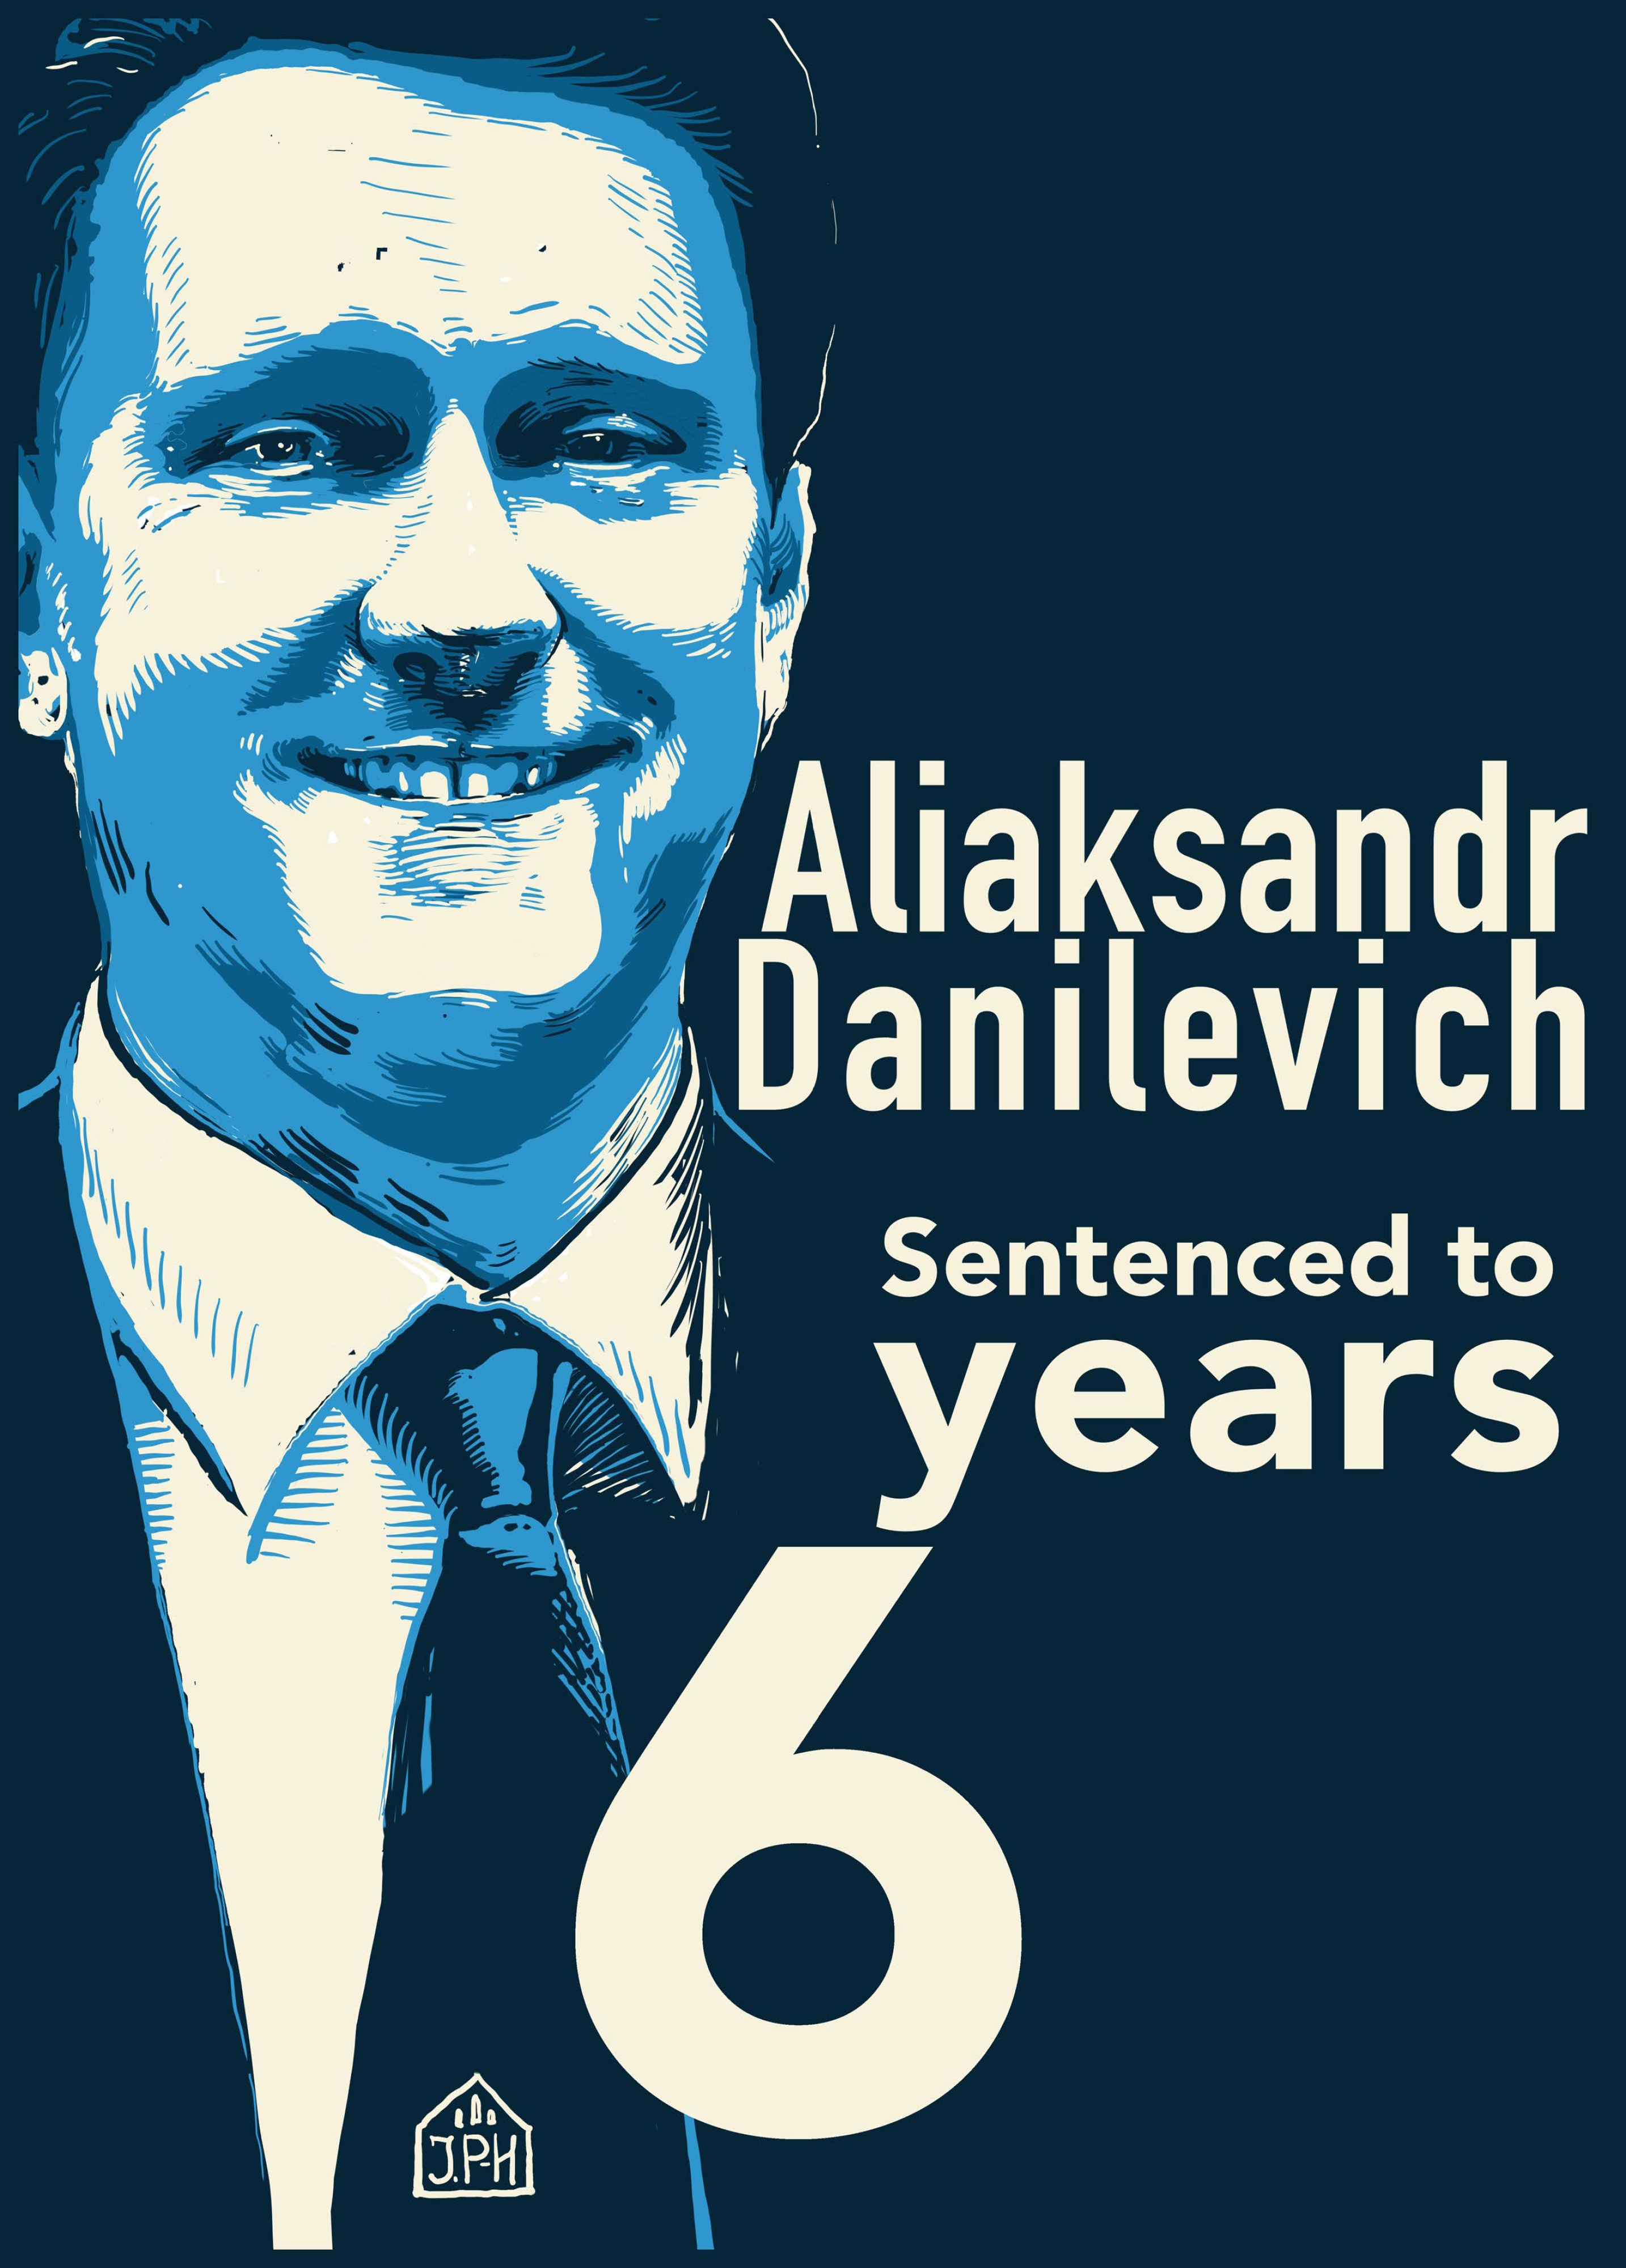 Illustrated poster with a headshot of Aliaksandr Danilevich